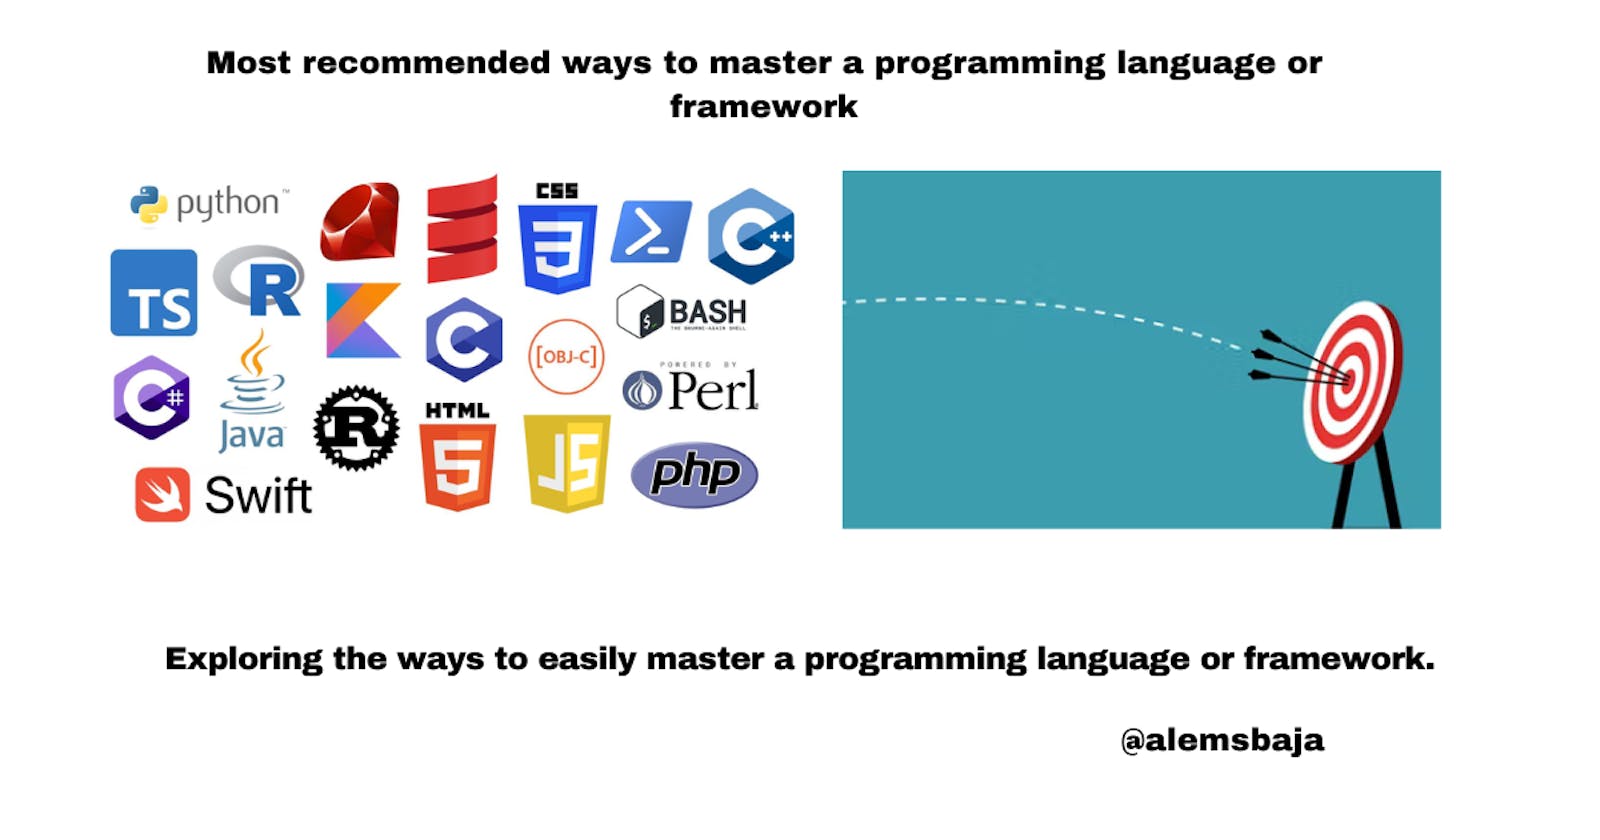 Most recommended ways to master a programming language or framework